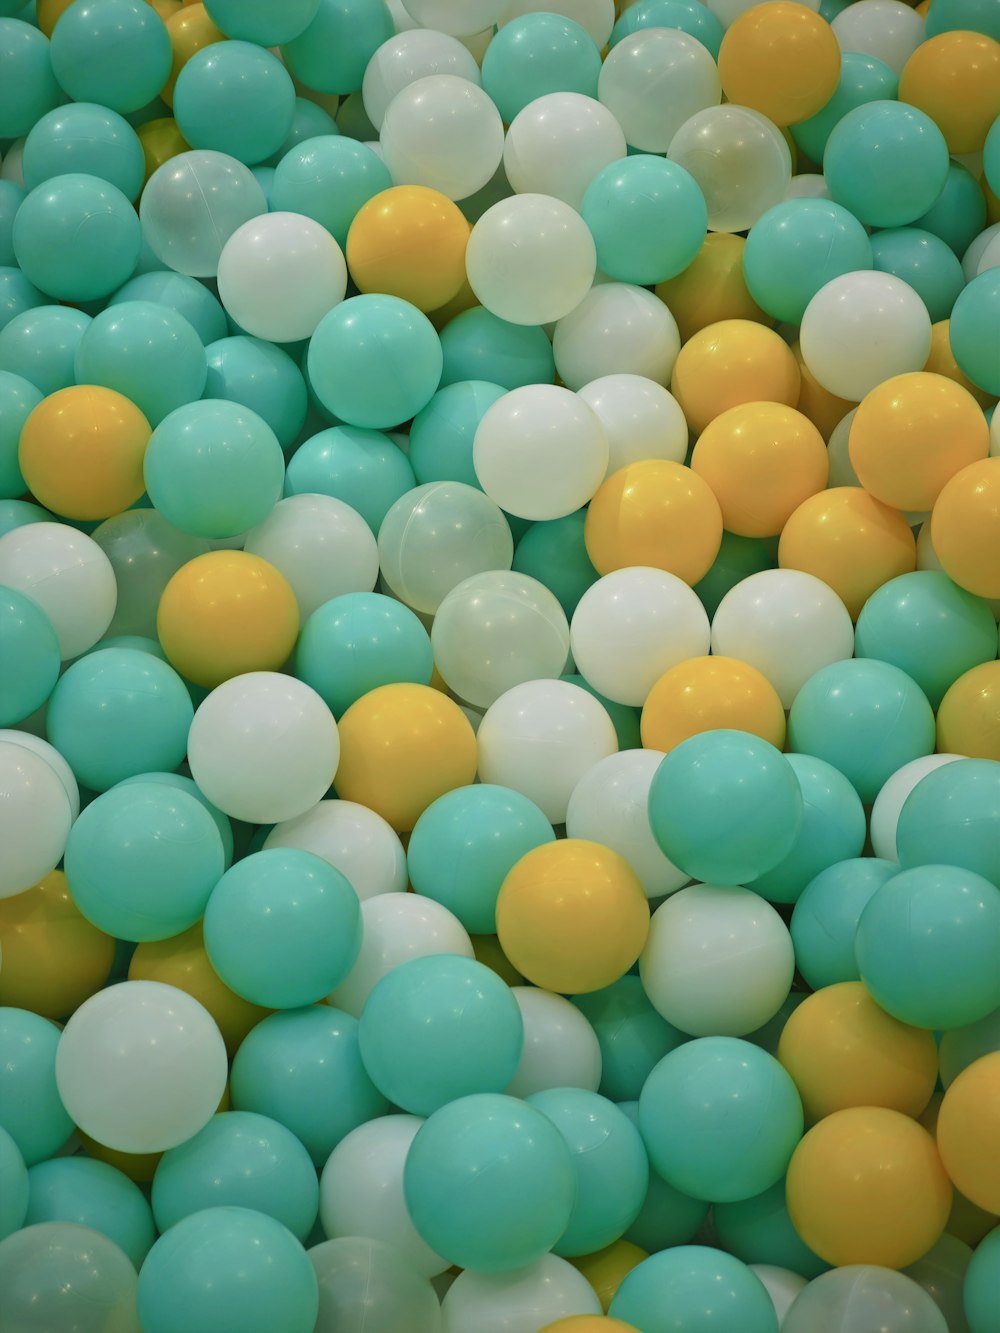 a bunch of balloons that are blue, yellow, and white